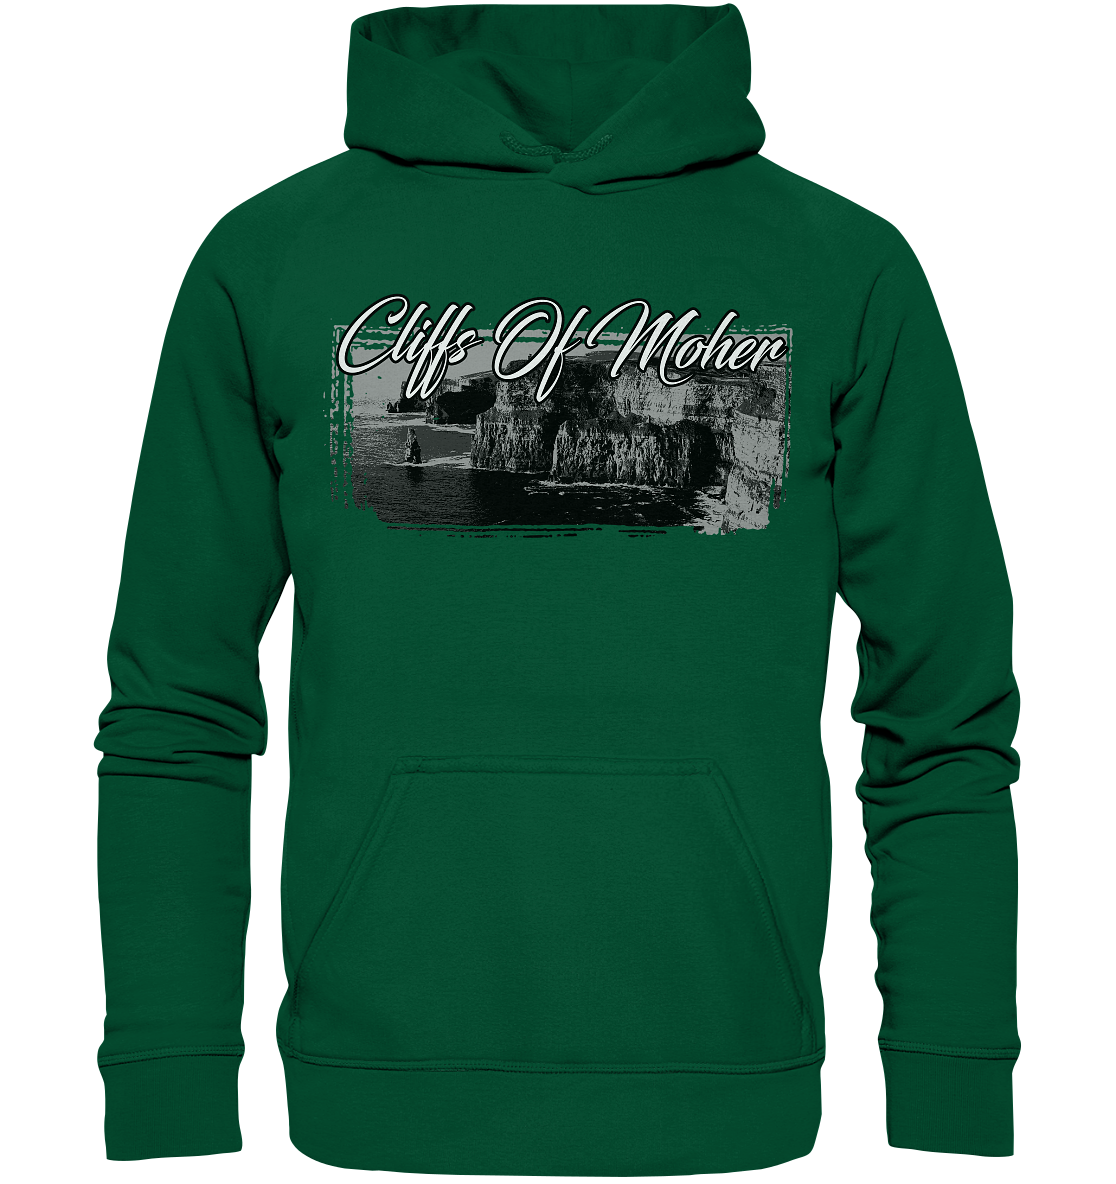 Cliffs Of Moher - Basic Unisex Hoodie